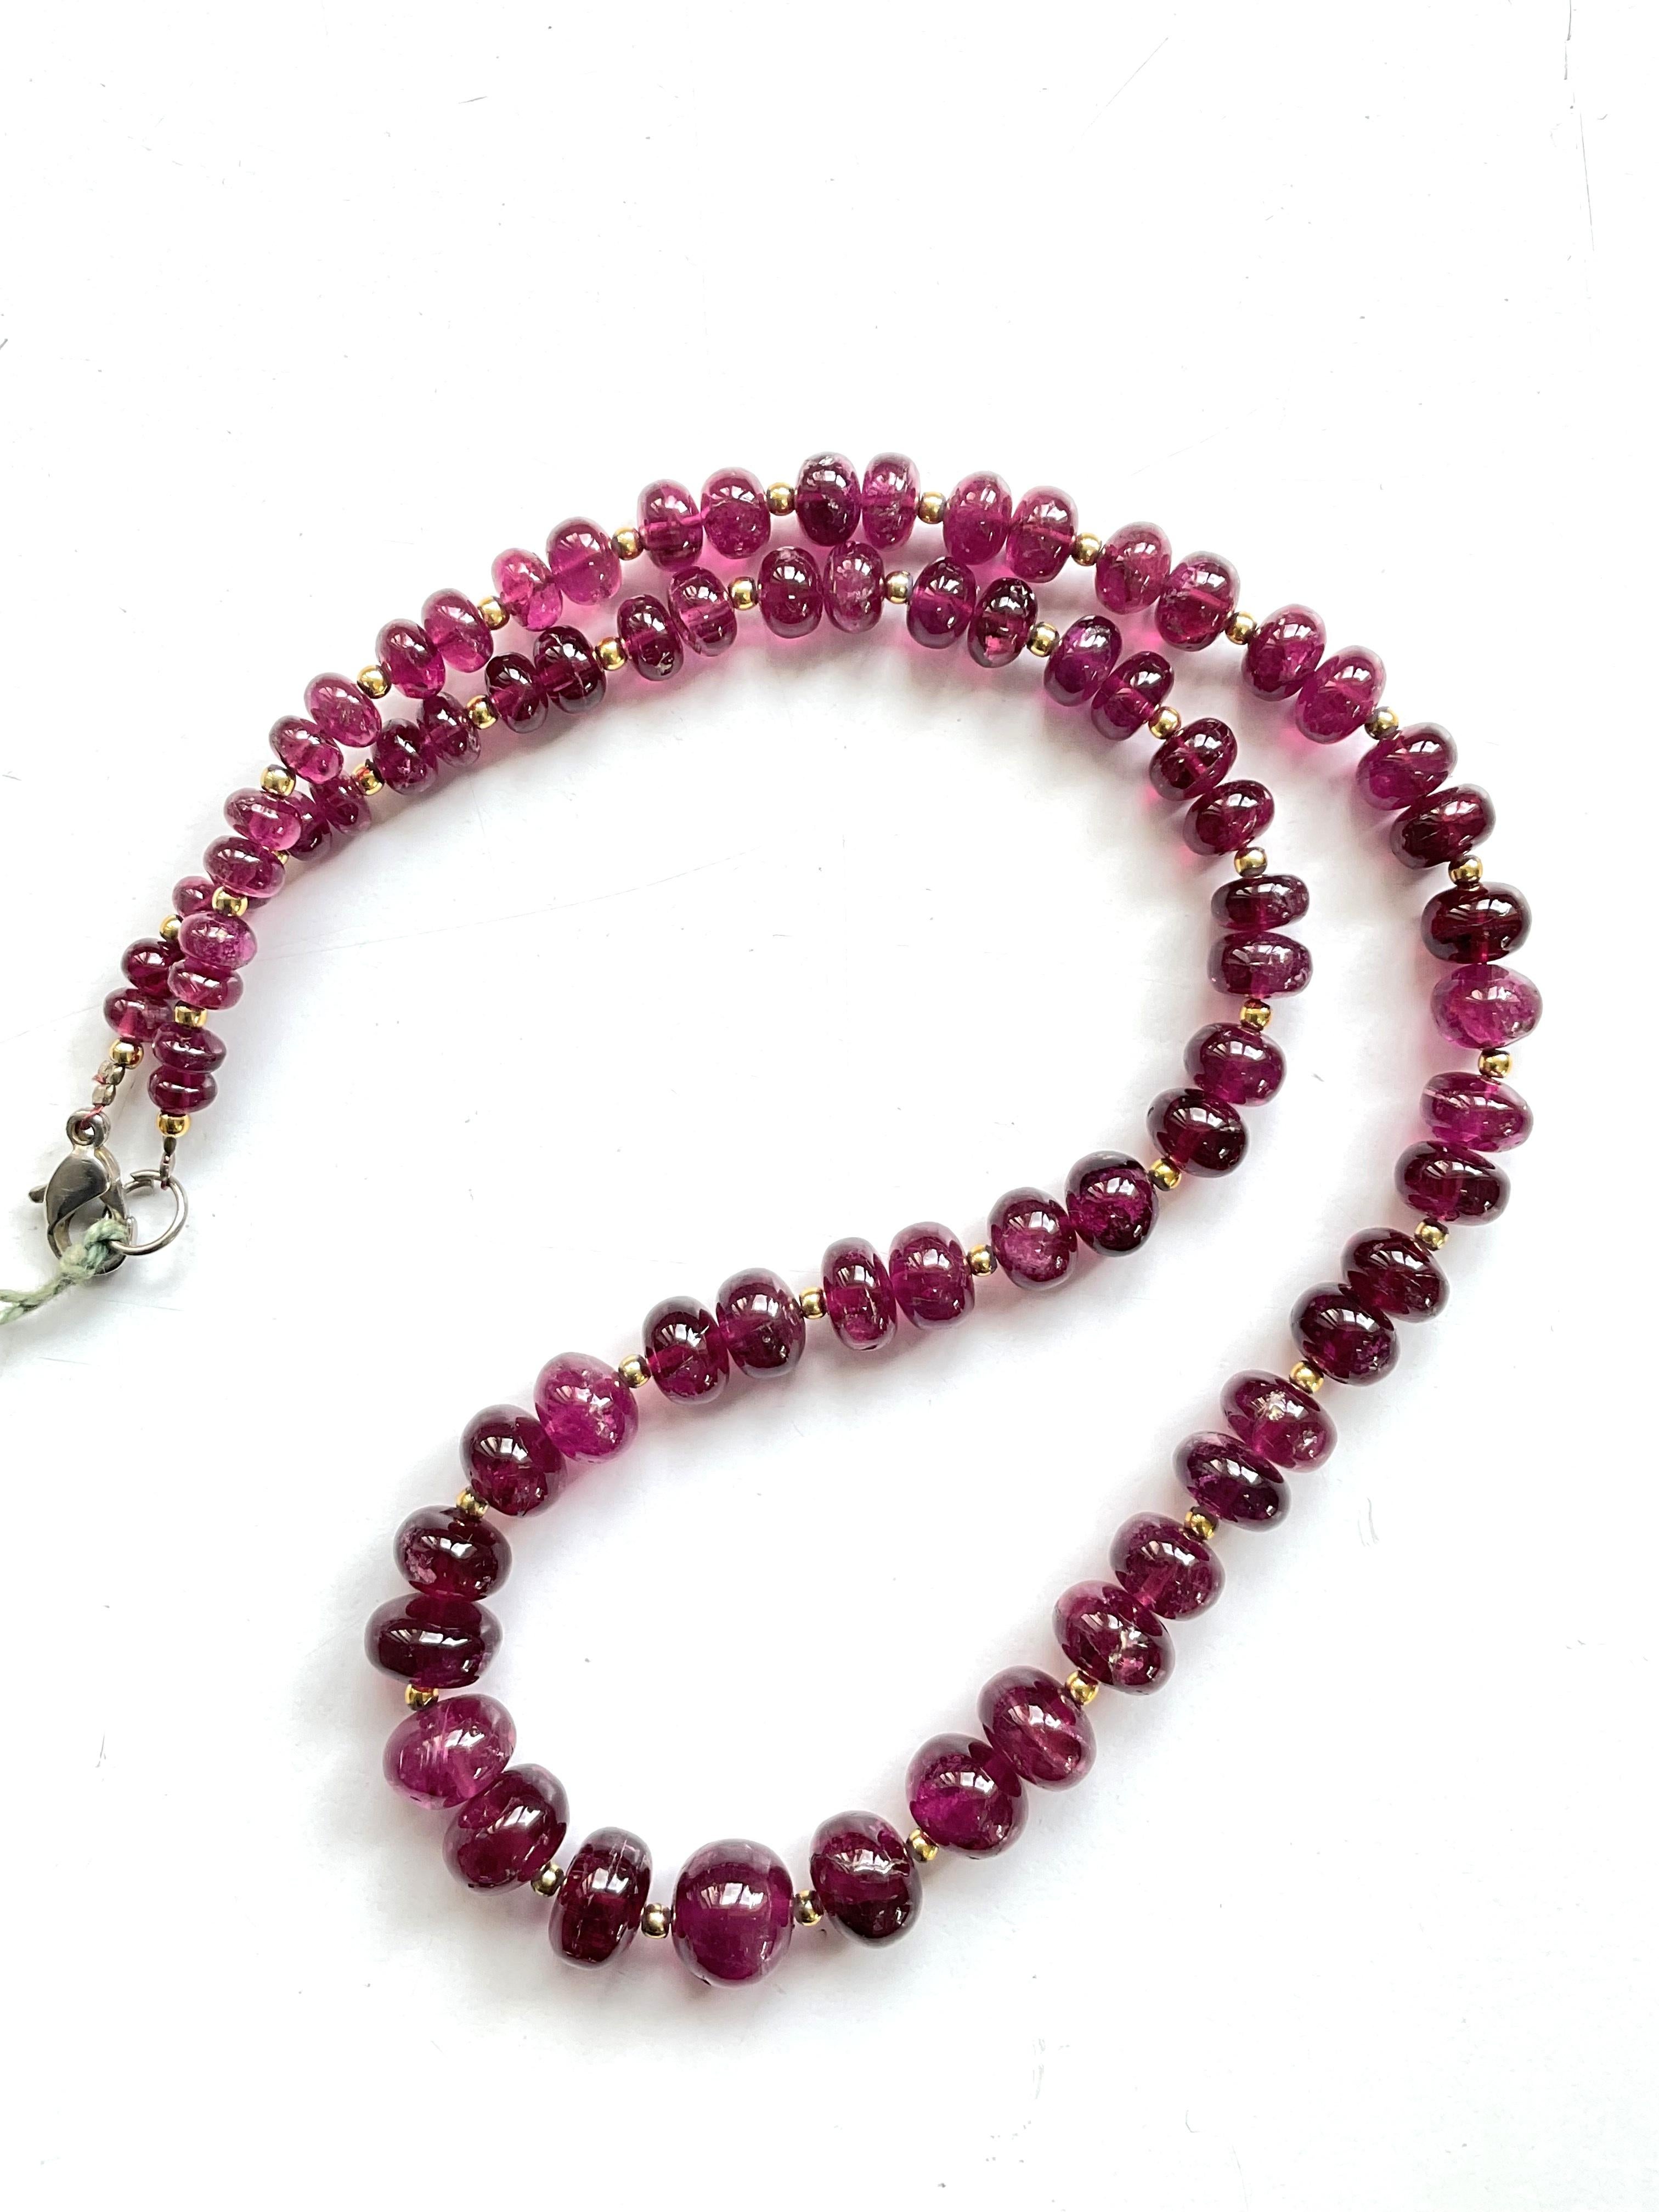 163.00 Carats Rubellite Tourmaline Plain Beads For Top Fine Jewelry Natural Gem For Sale 1